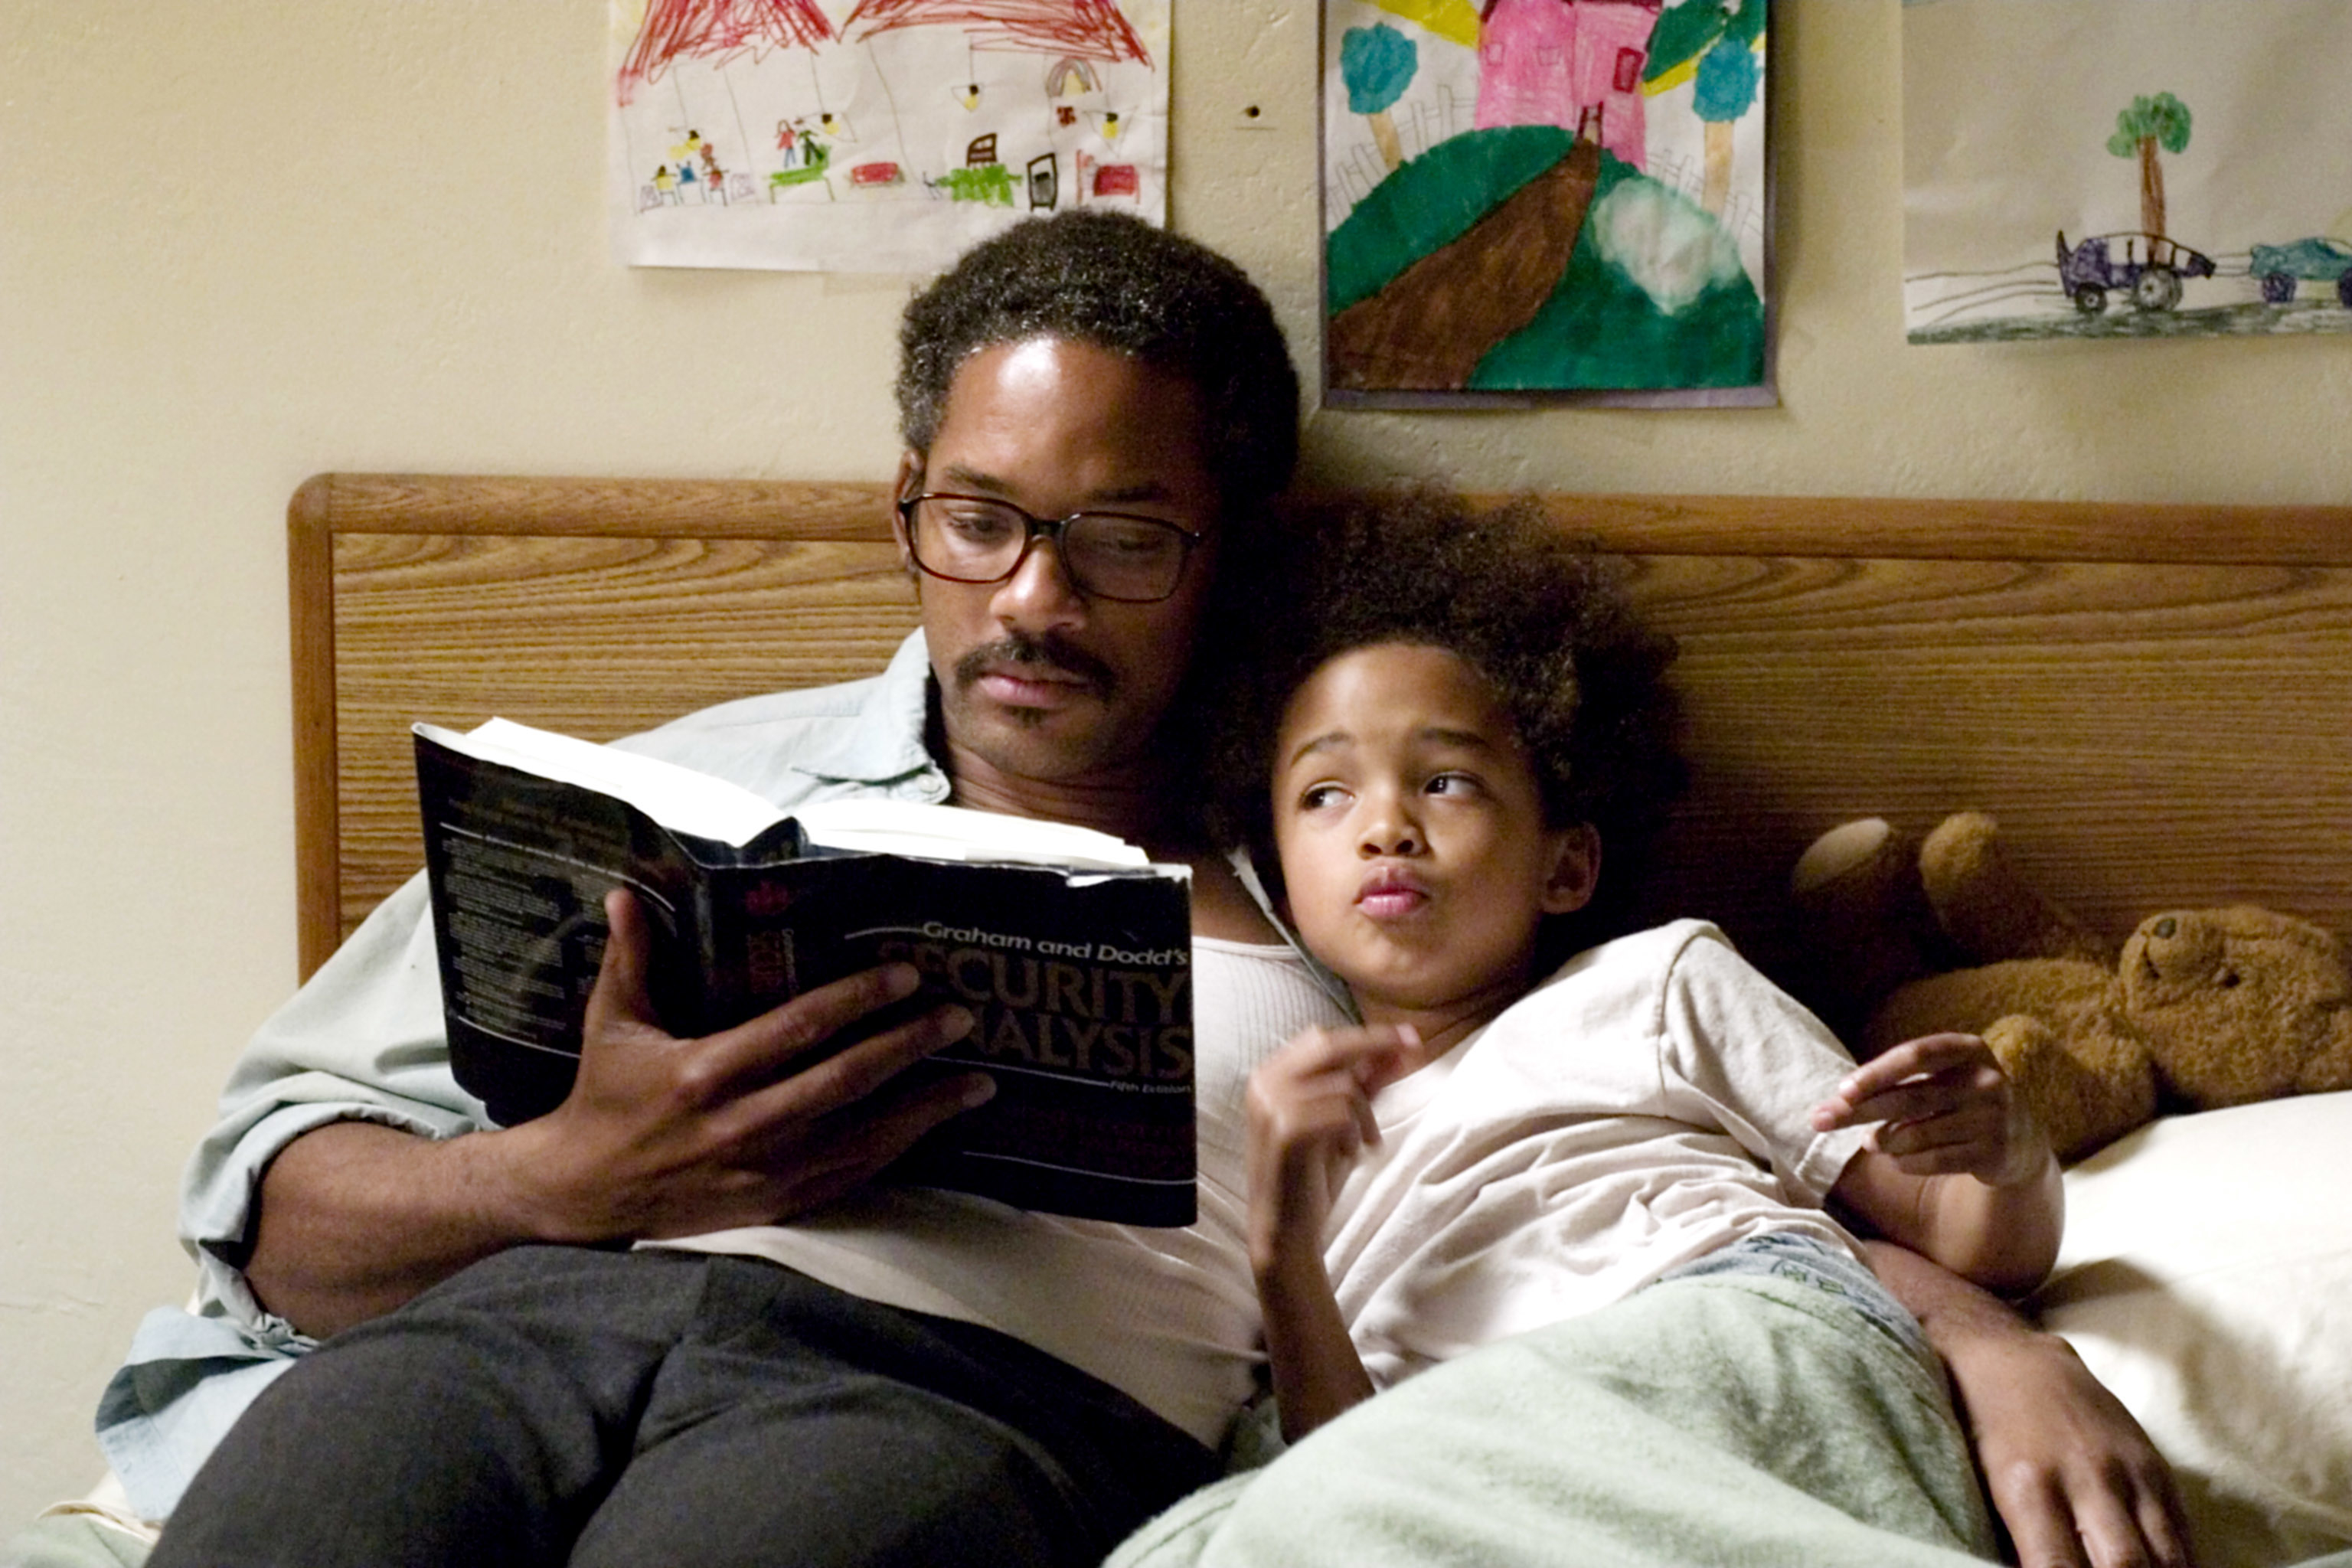 Man and child relax in bed, man reads book, child listens. They are TV characters in a domestic scene